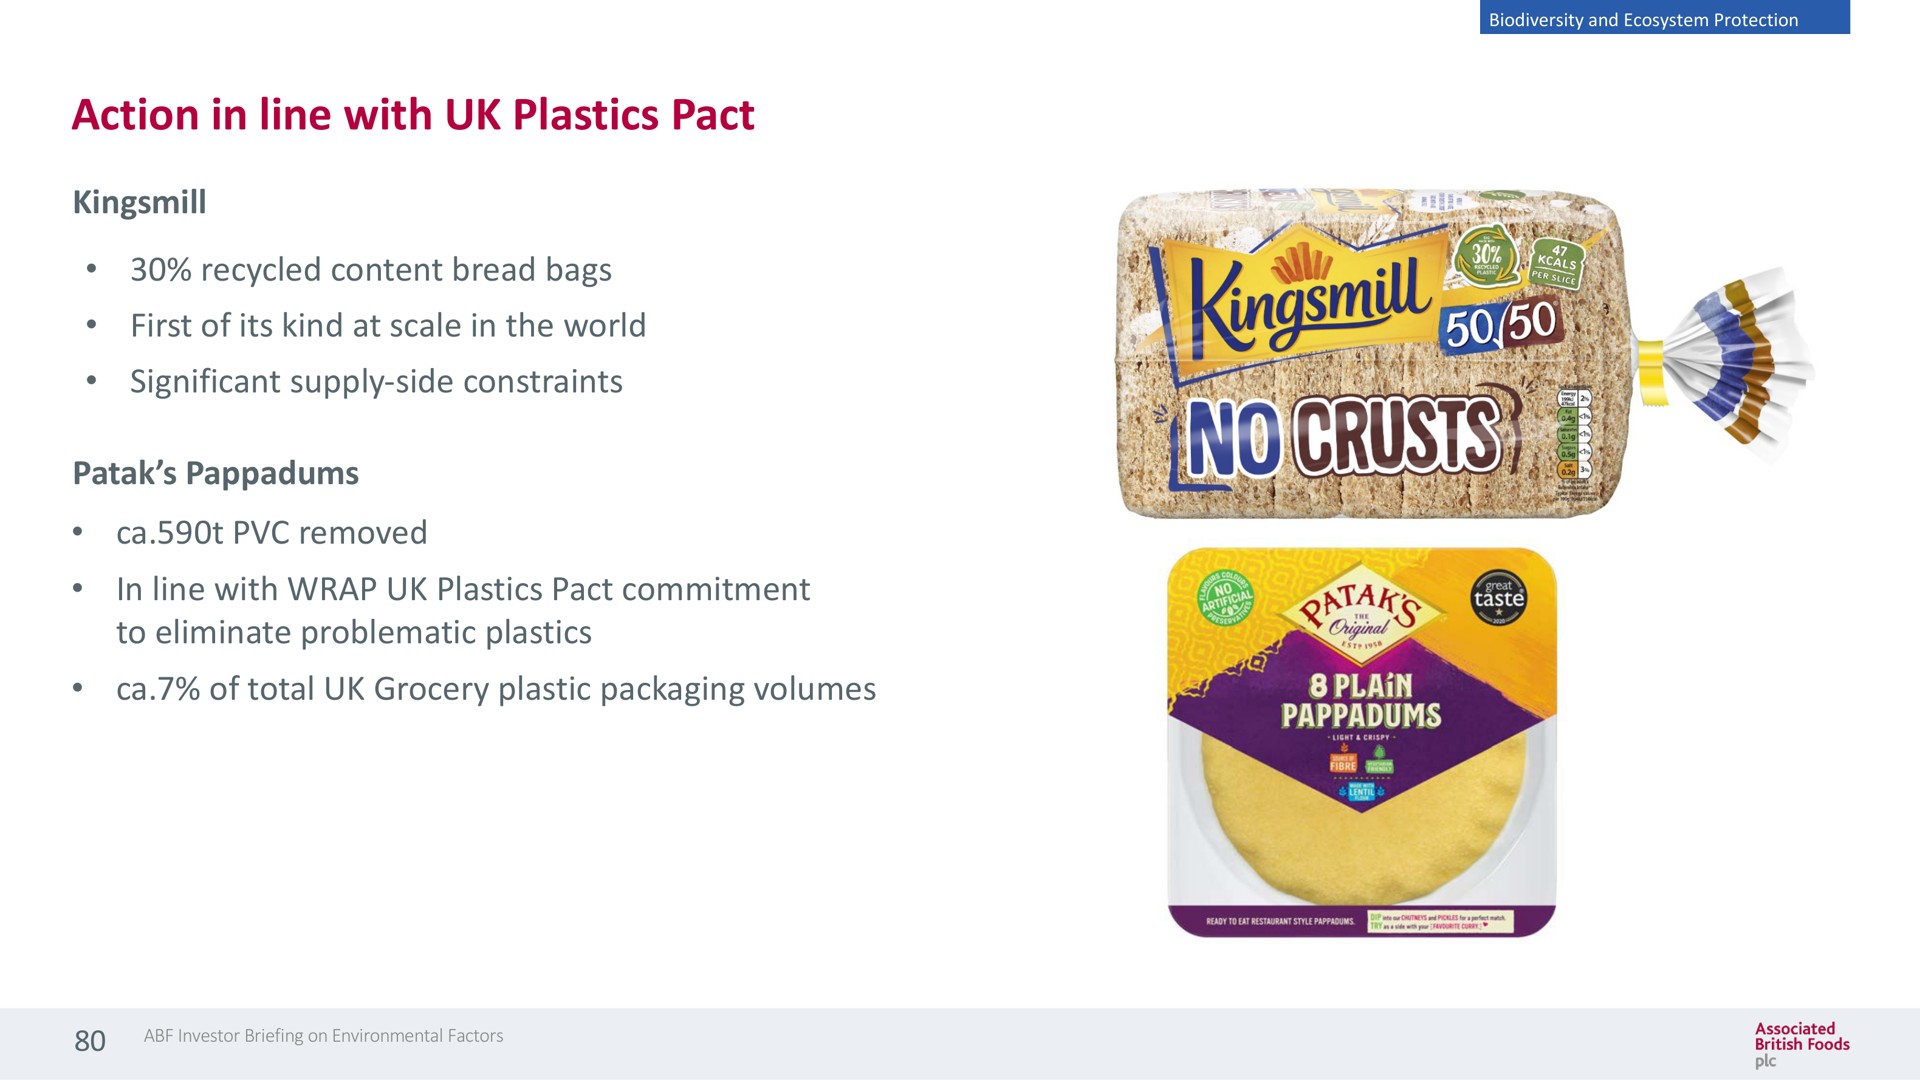 action in line with plastics pact recycled content bread bags first of its kind at scale in the world significant supply side constraints removed in line with wrap plastics pact commitment to eliminate problematic plastics of total grocery plastic packaging volumes | Associated British Foods